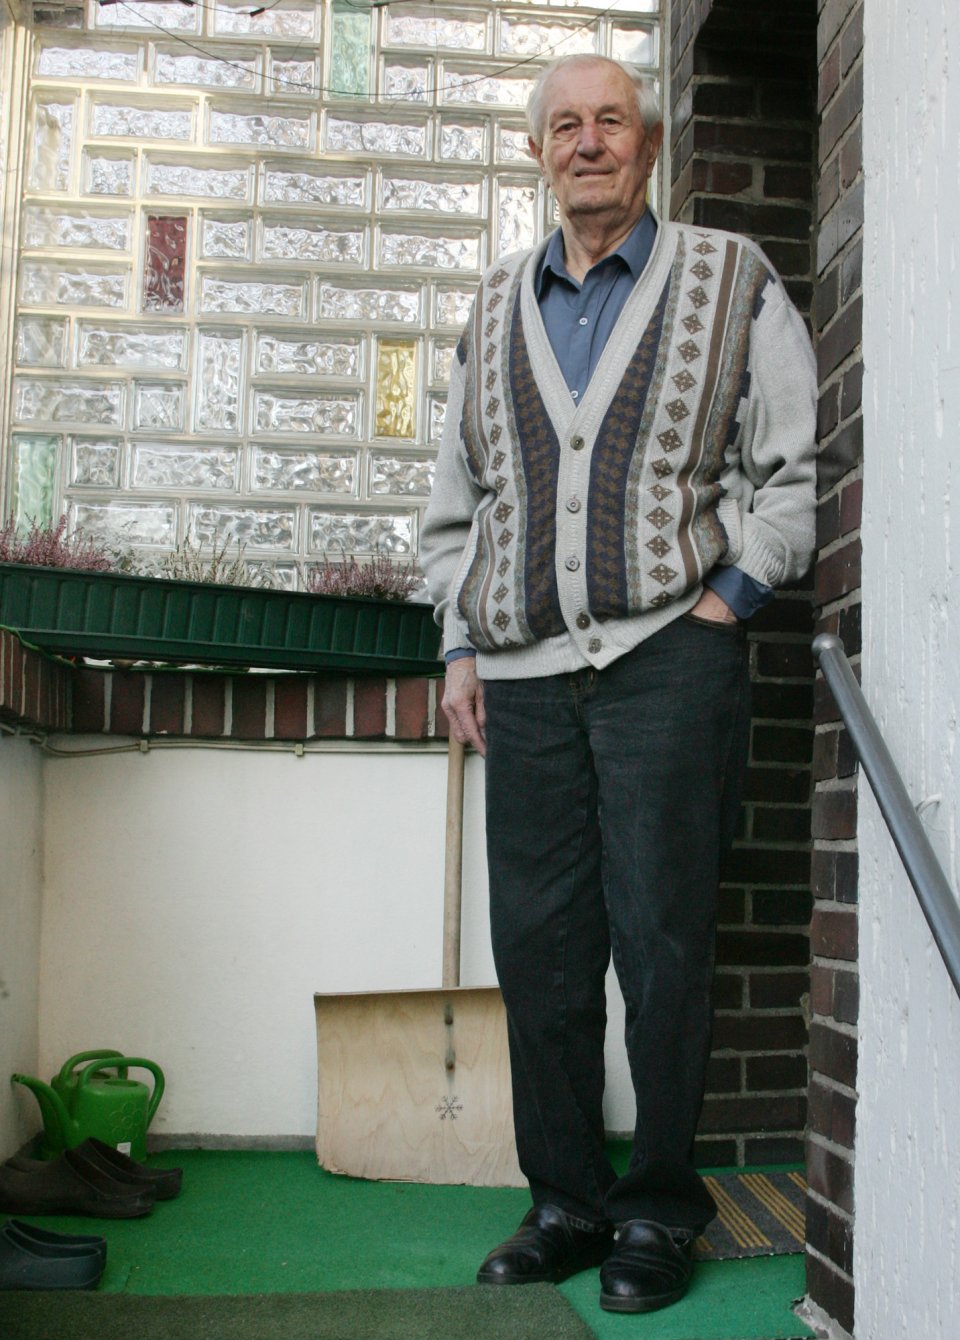 FILE - In this March 10, 2005 file photo Hitler's bodyguard Rochus Misch poses at his home in Berlin, Germany. Misch, who was the last remaining witness to the Nazi leader's final hours in his Berlin bunker, has died Thursday, Sept. 5, 2013. He was 96. (AP Photo/Herbert Knosowski, File)